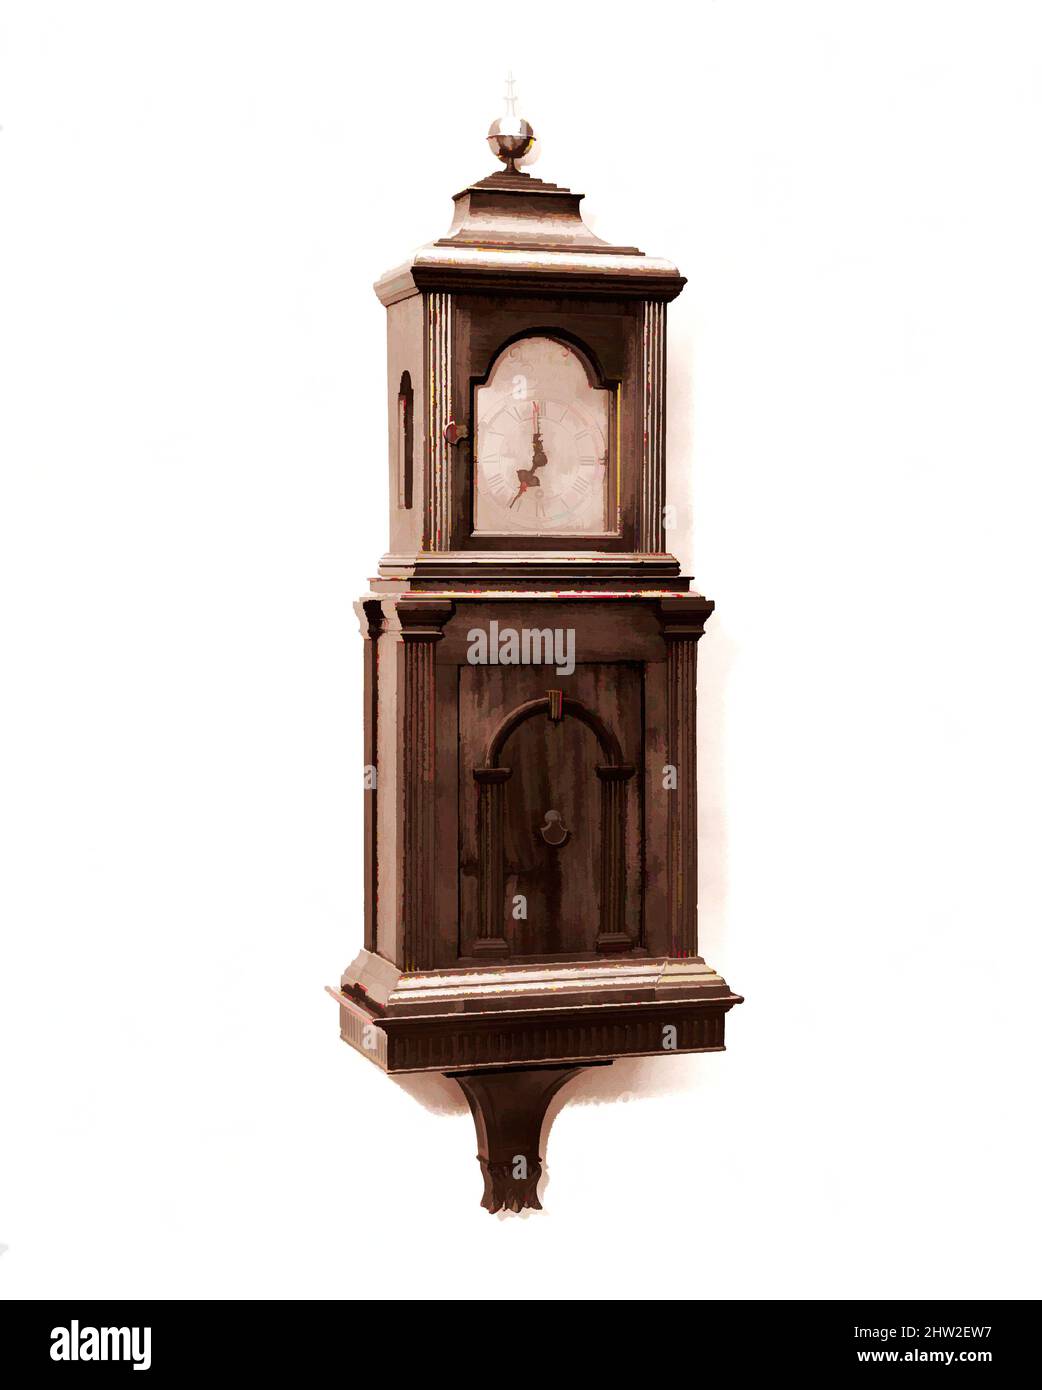 Art inspired by Shelf Clock, 1792–1800, Made in Newburyport, Massachusetts, United States, American, Mahogany, mahogany veneer, white pine, 31 1/2 x 12 1/4 x 6 1/4 in. (80 x 31.1 x 15.9 cm), Furniture, David Wood (1766–ca. 1850, Classic works modernized by Artotop with a splash of modernity. Shapes, color and value, eye-catching visual impact on art. Emotions through freedom of artworks in a contemporary way. A timeless message pursuing a wildly creative new direction. Artists turning to the digital medium and creating the Artotop NFT Stock Photo